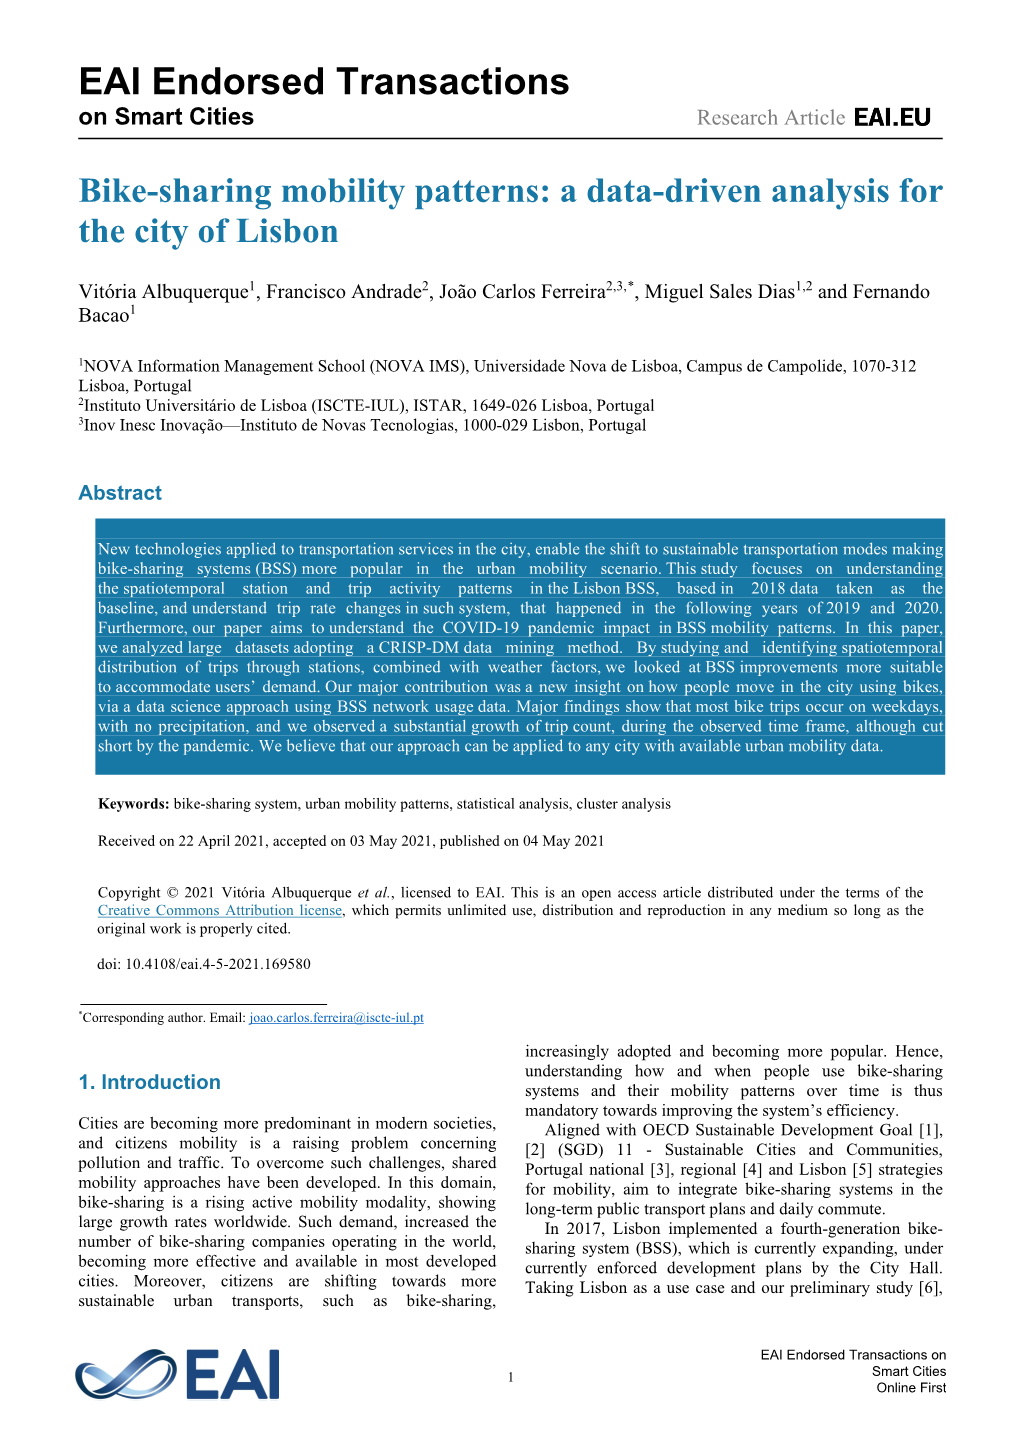 Bike-Sharing Mobility Patterns: a Data-Driven Analysis for the City of Lisbon